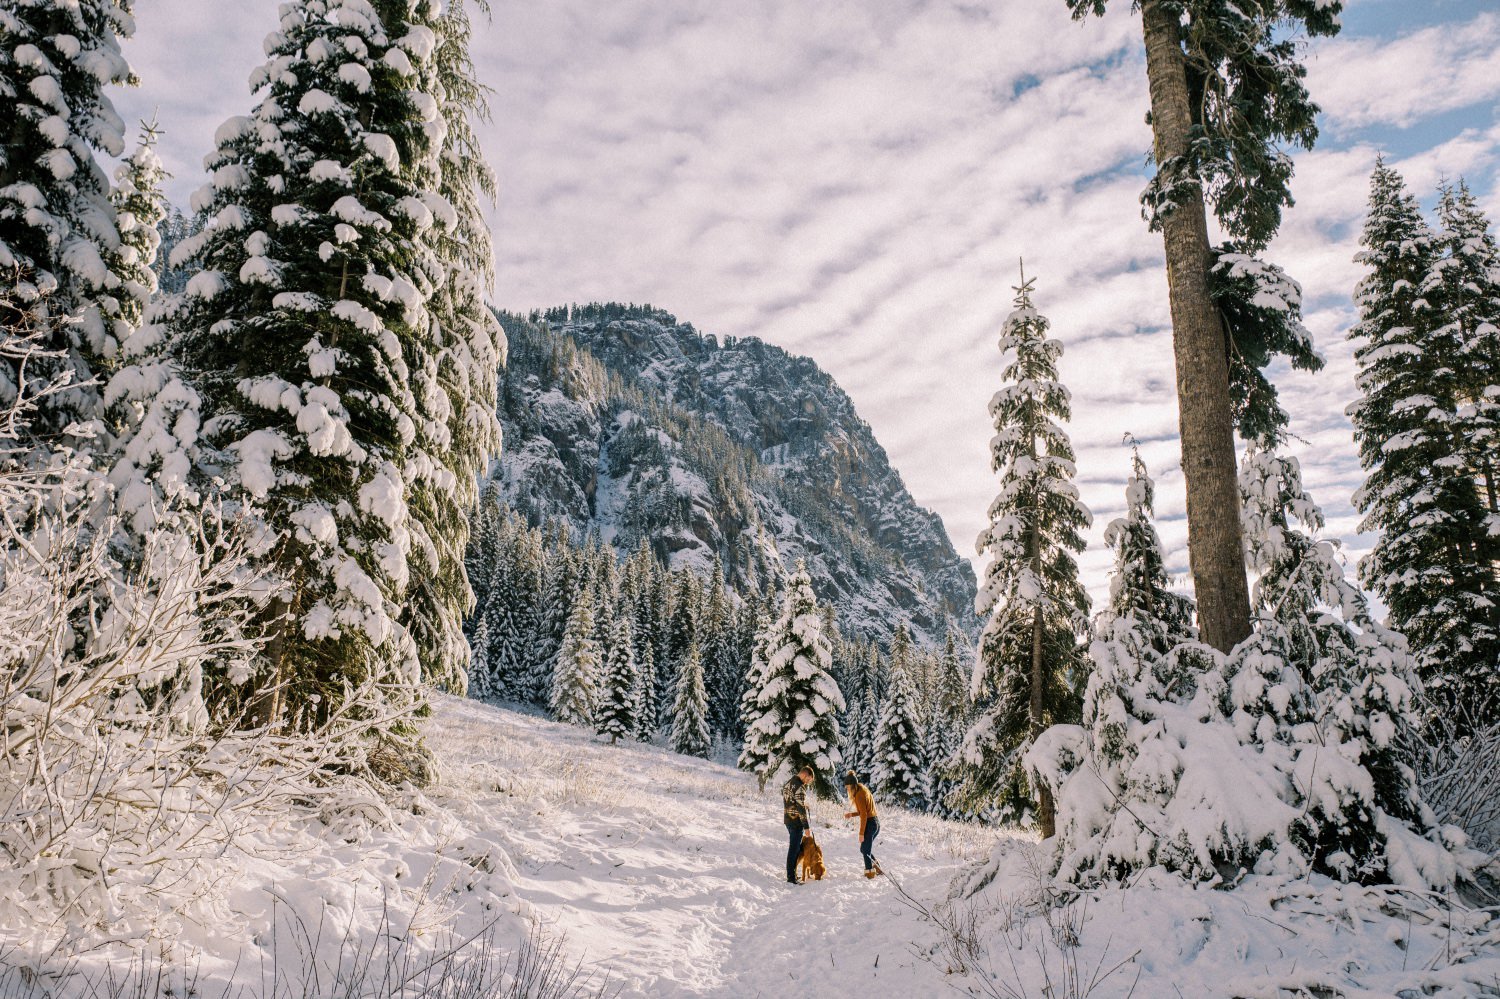 15_Snowy engagement photos at Snoqualmie Pass near Seattle, with a film-like style by Ryan Flynn Photography.jpg